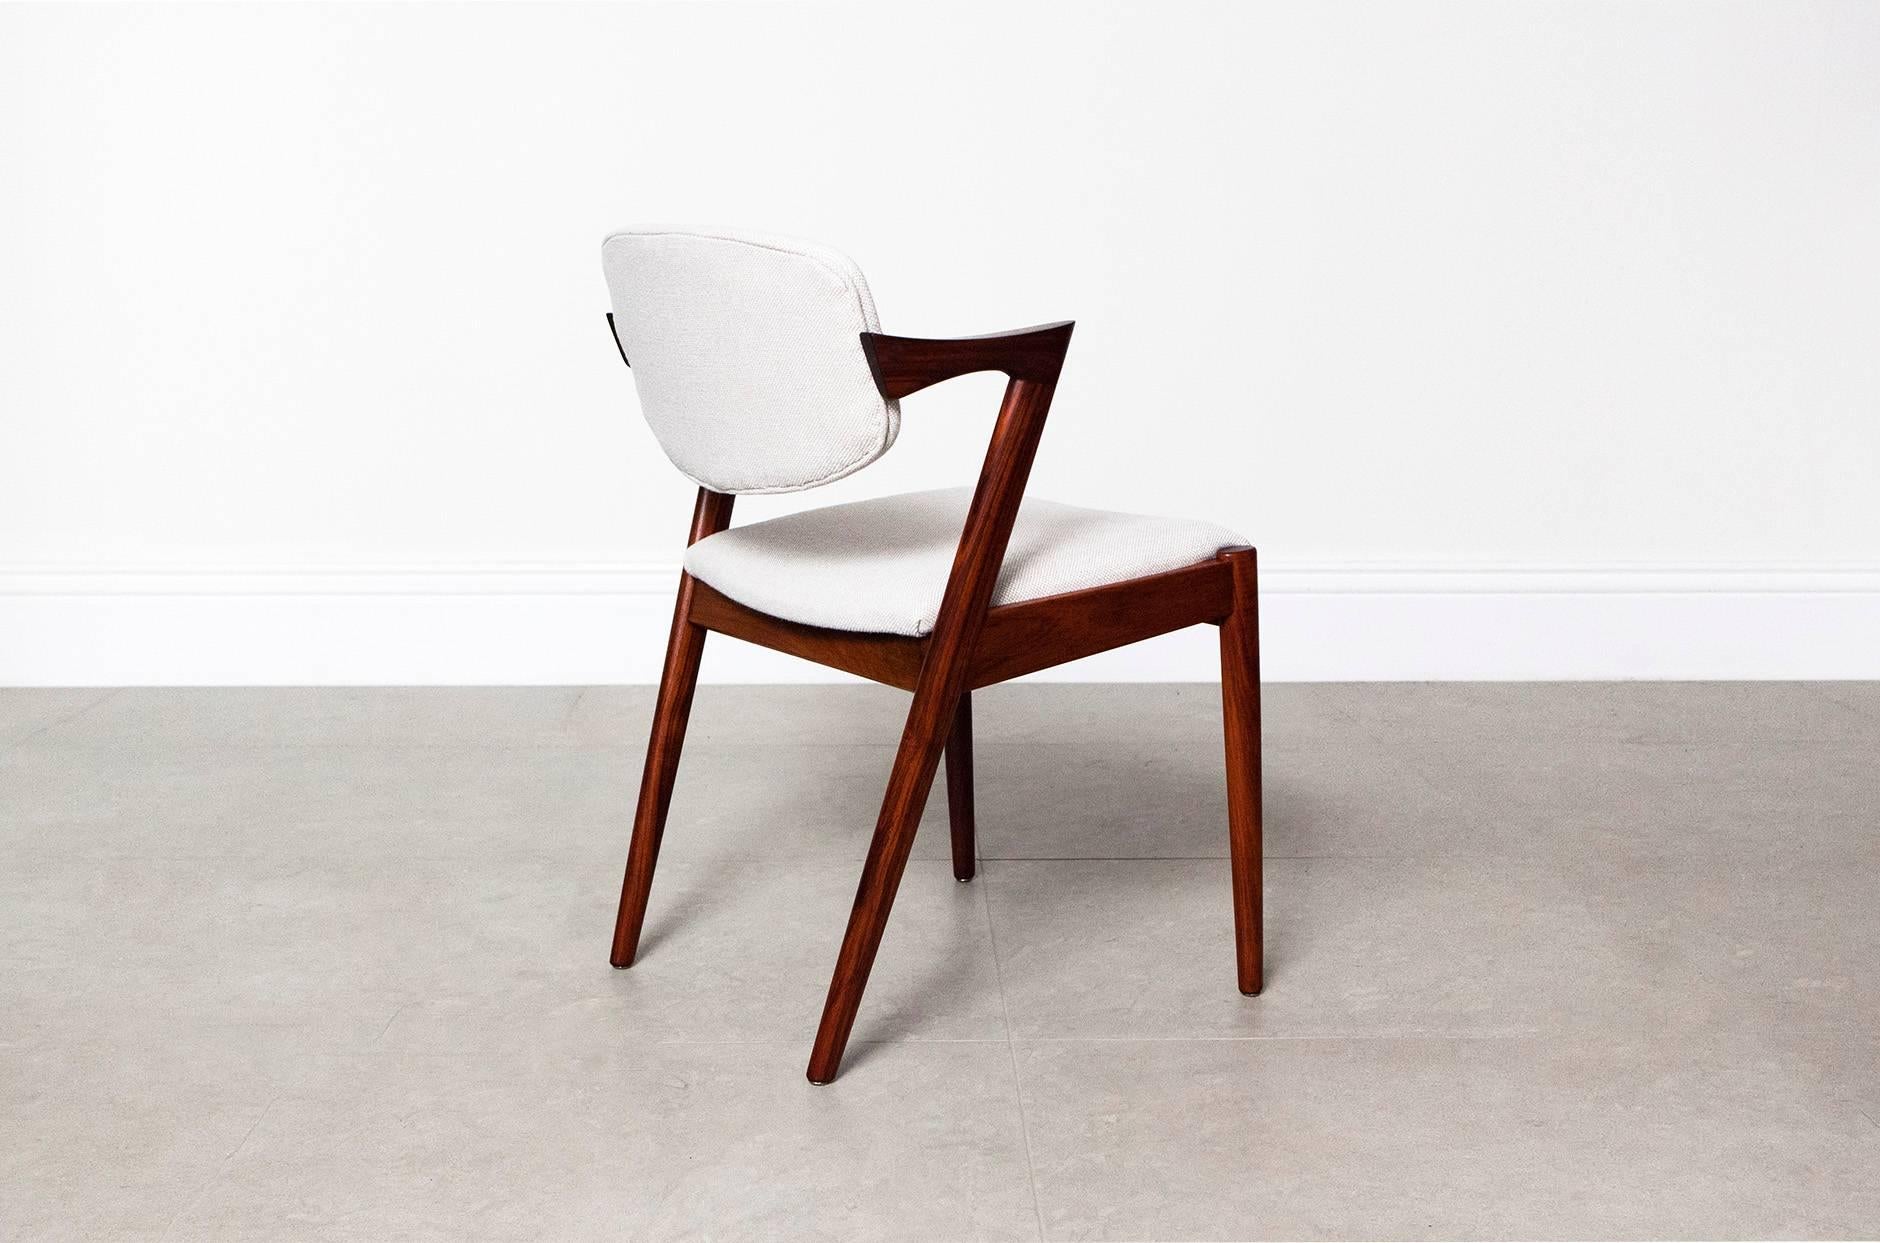 The iconic model 42 chair from Kai Kristiansen, also know as the 'Z' chair. This set comes in rare Brazilian rosewood with a wonderfully exotic grain. The back supports pivot making them incredibly comfortable. Seat and back pads have been recovered